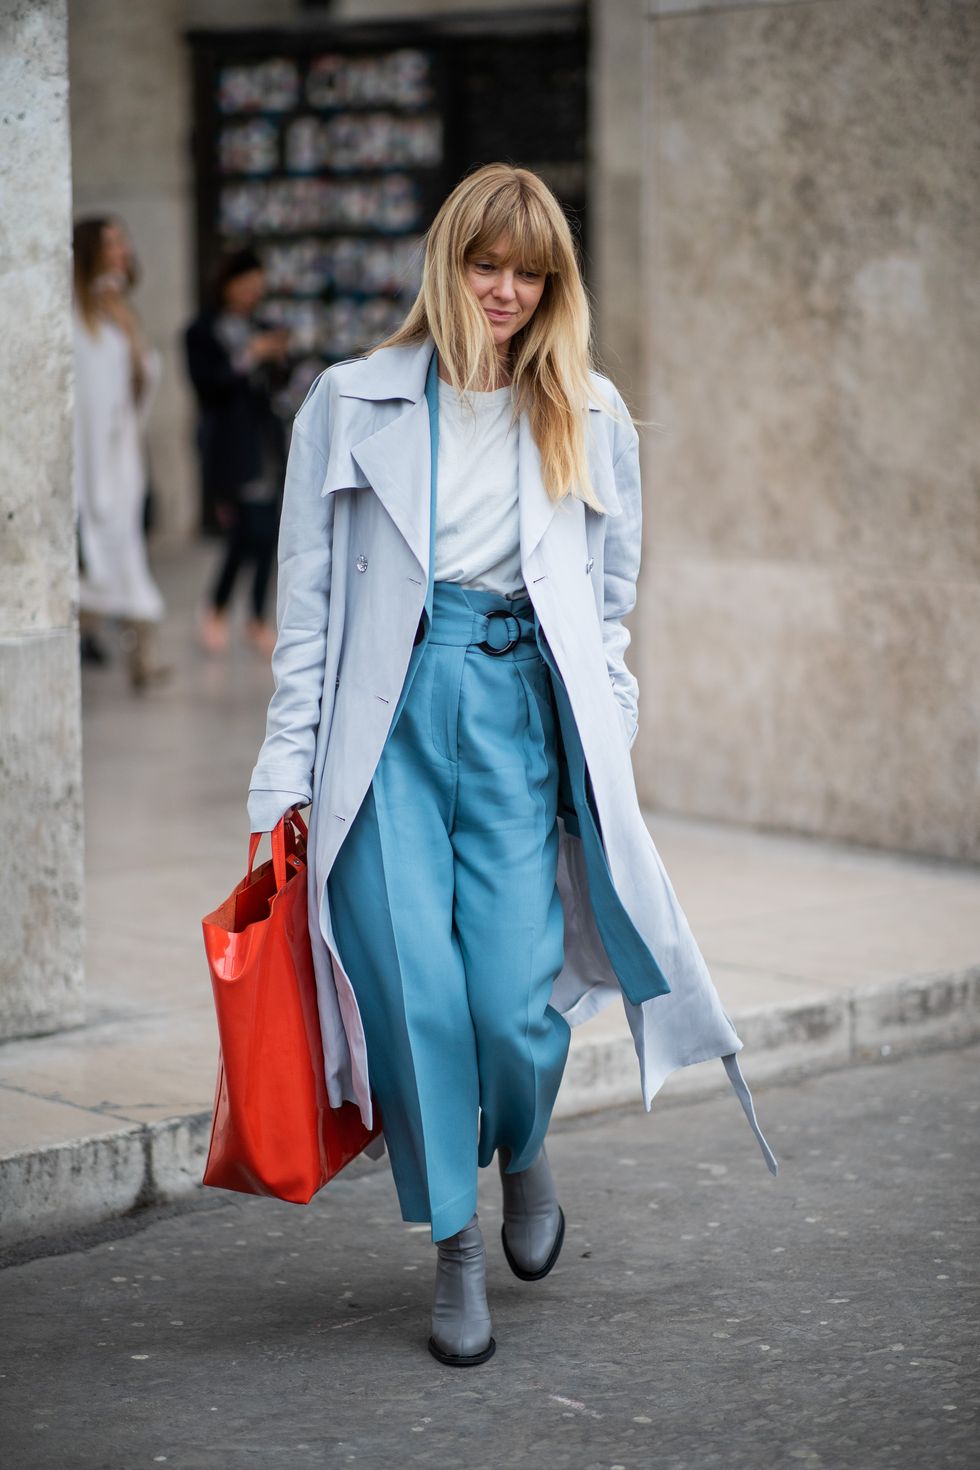 paris, france   march 02 jeanette friis madsen is seen wearing oversized red bag, blue coat outside cédric charlier during paris fashion week womenswear fallwinter 20192020 on march 02, 2019 in paris, france photo by christian vieriggetty images